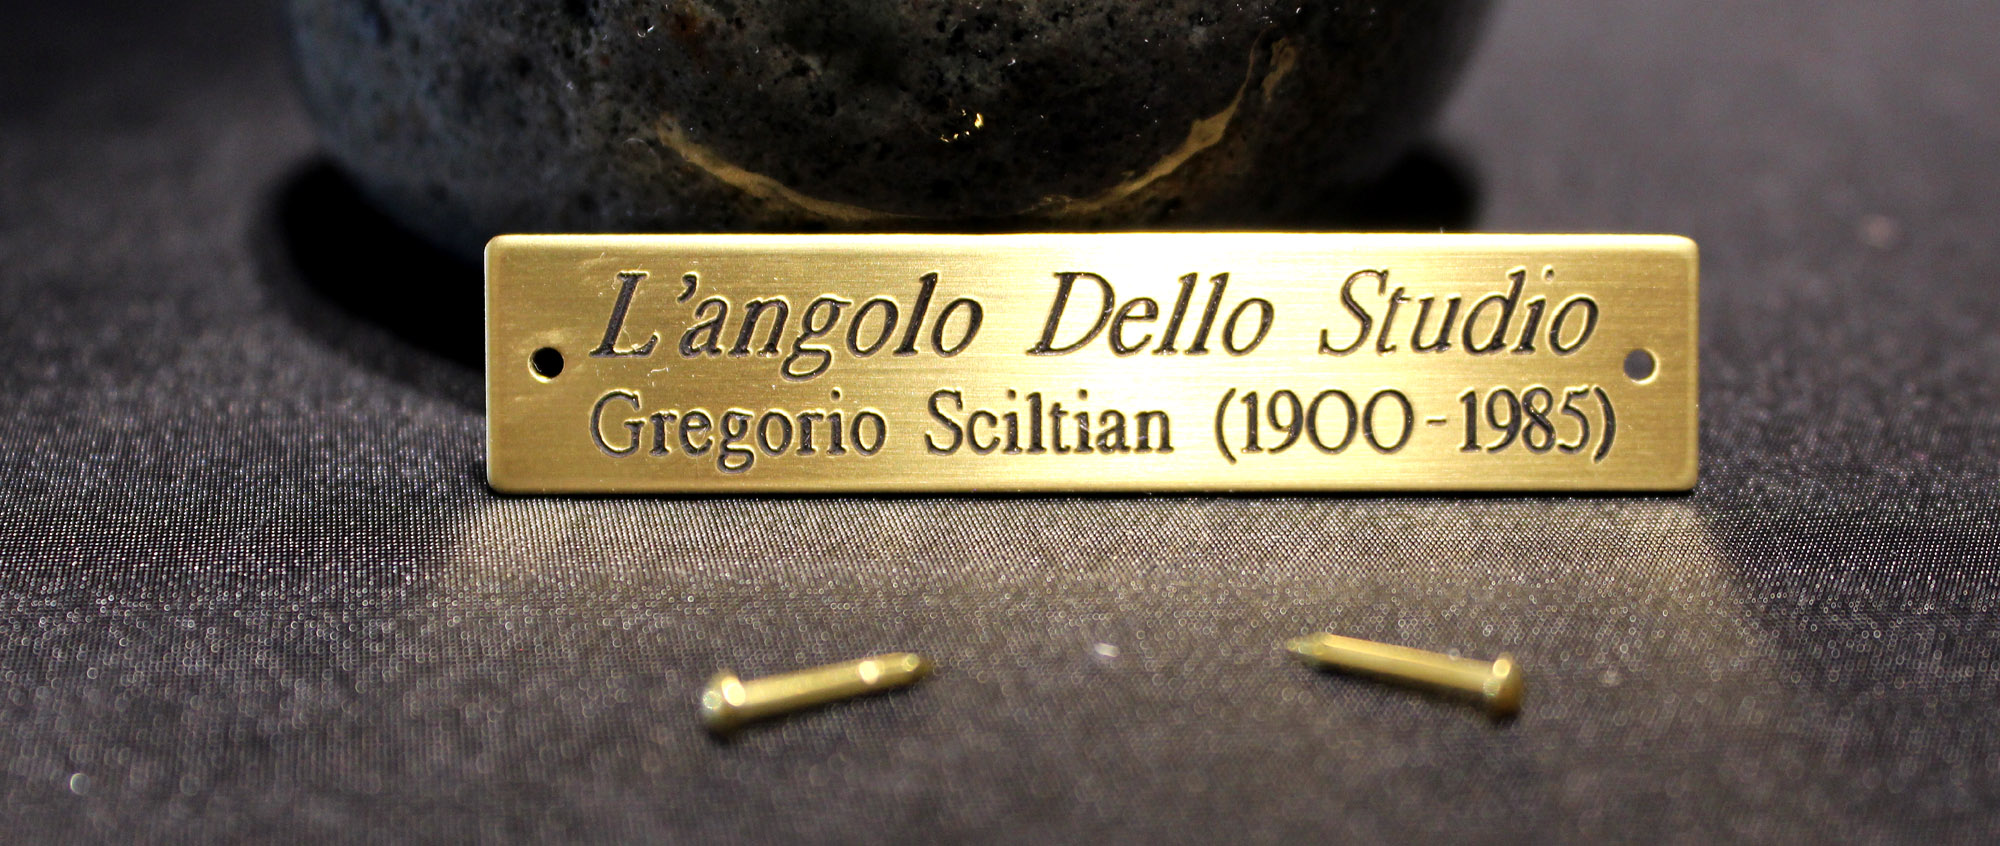 Name Plates - Wilson Trophy